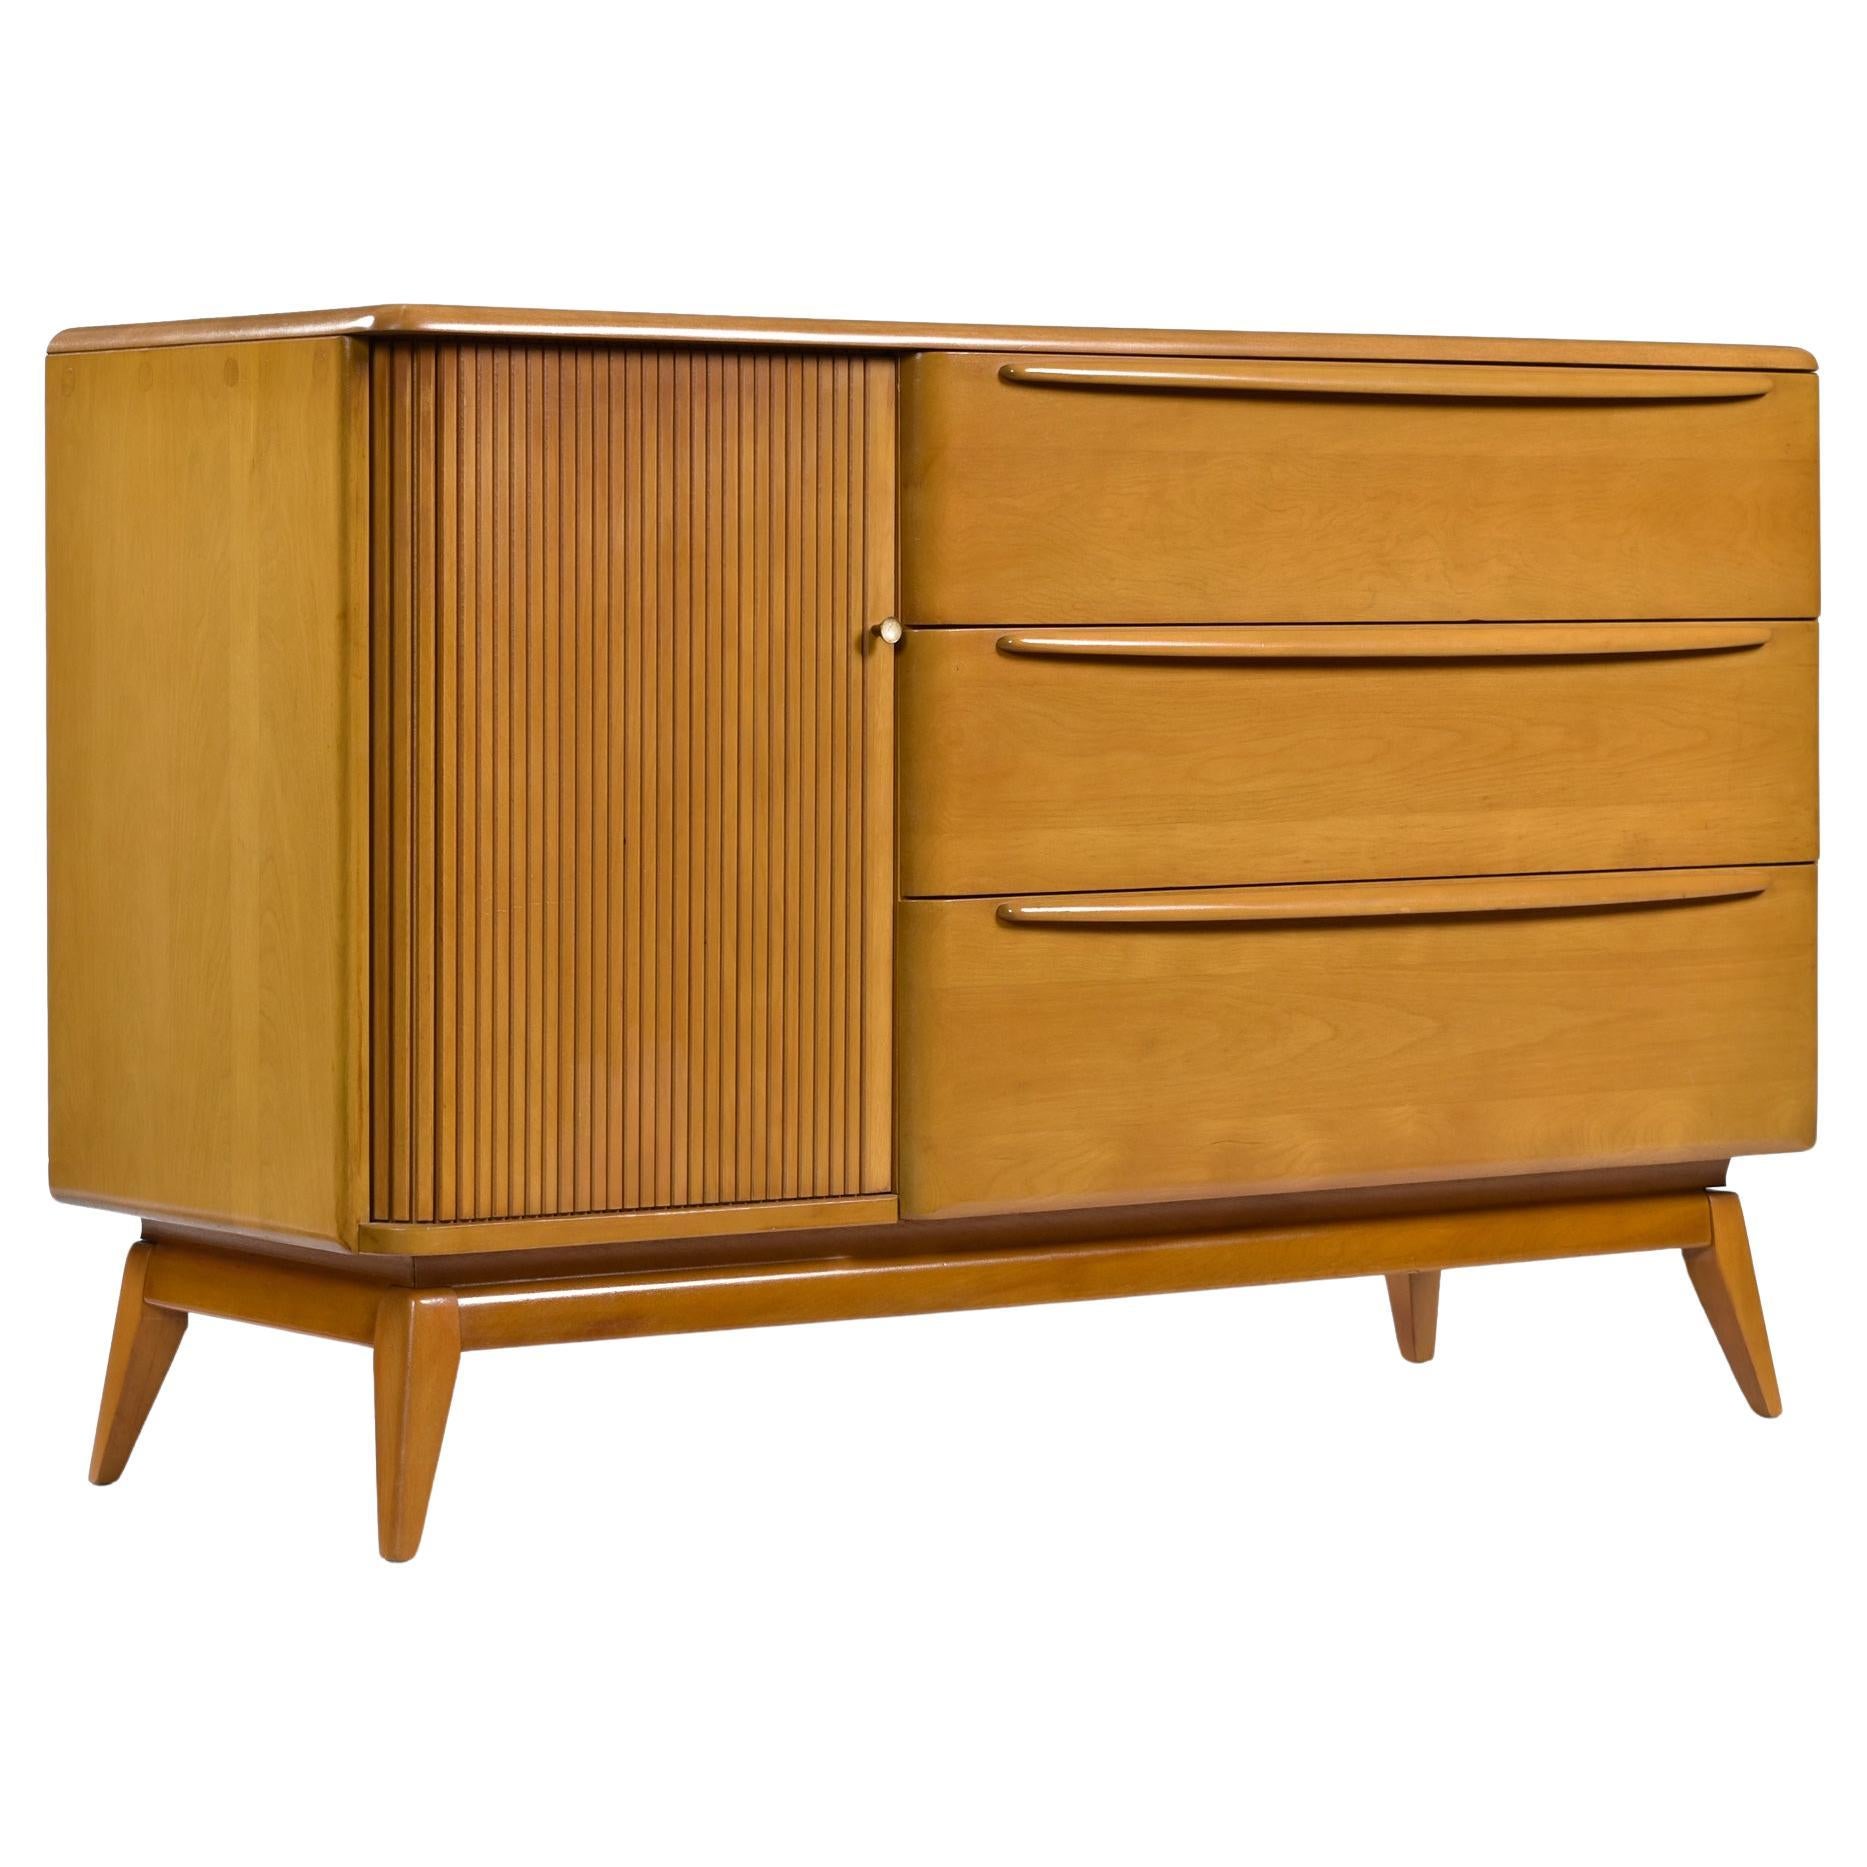 Vintage Restored Solid Maple Heywood Wakefield M-1542 Wheat Tambour Credenza For Sale